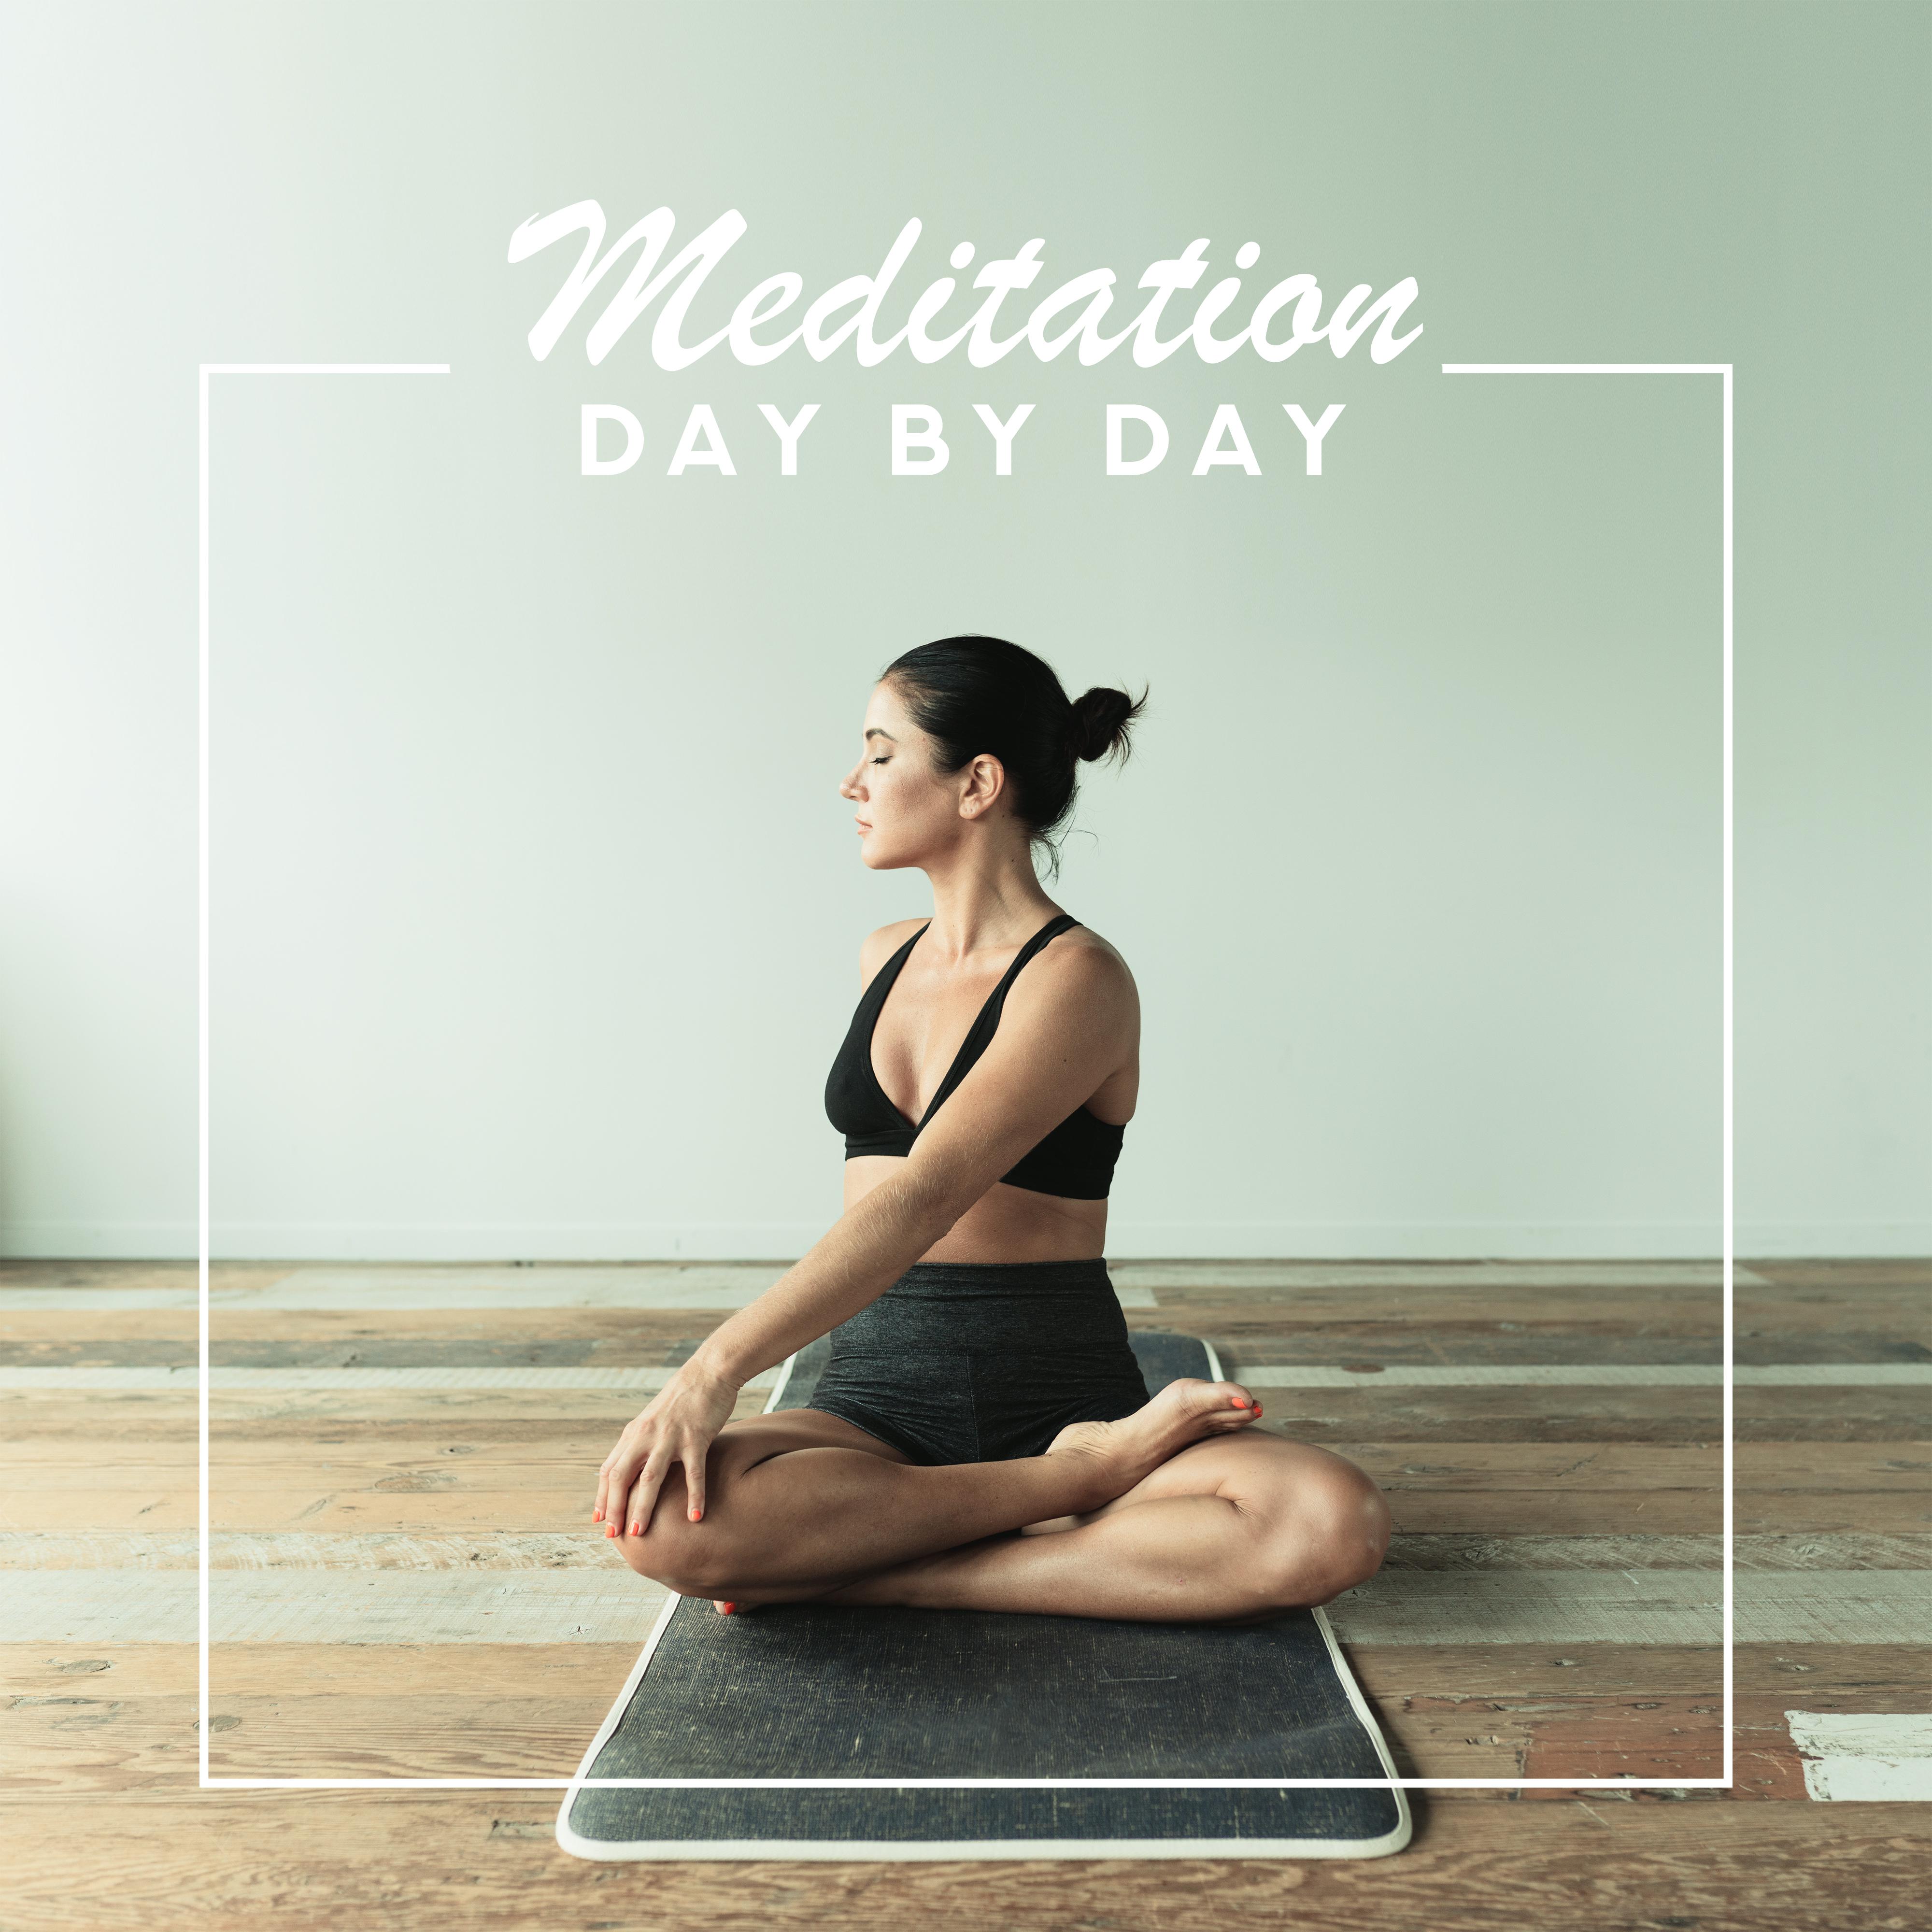 Meditation Day by Day - Everyday Set for the Practice of Meditation to Relieve Stress, Tension, Nerves, Anxiety, Irritation and Anger